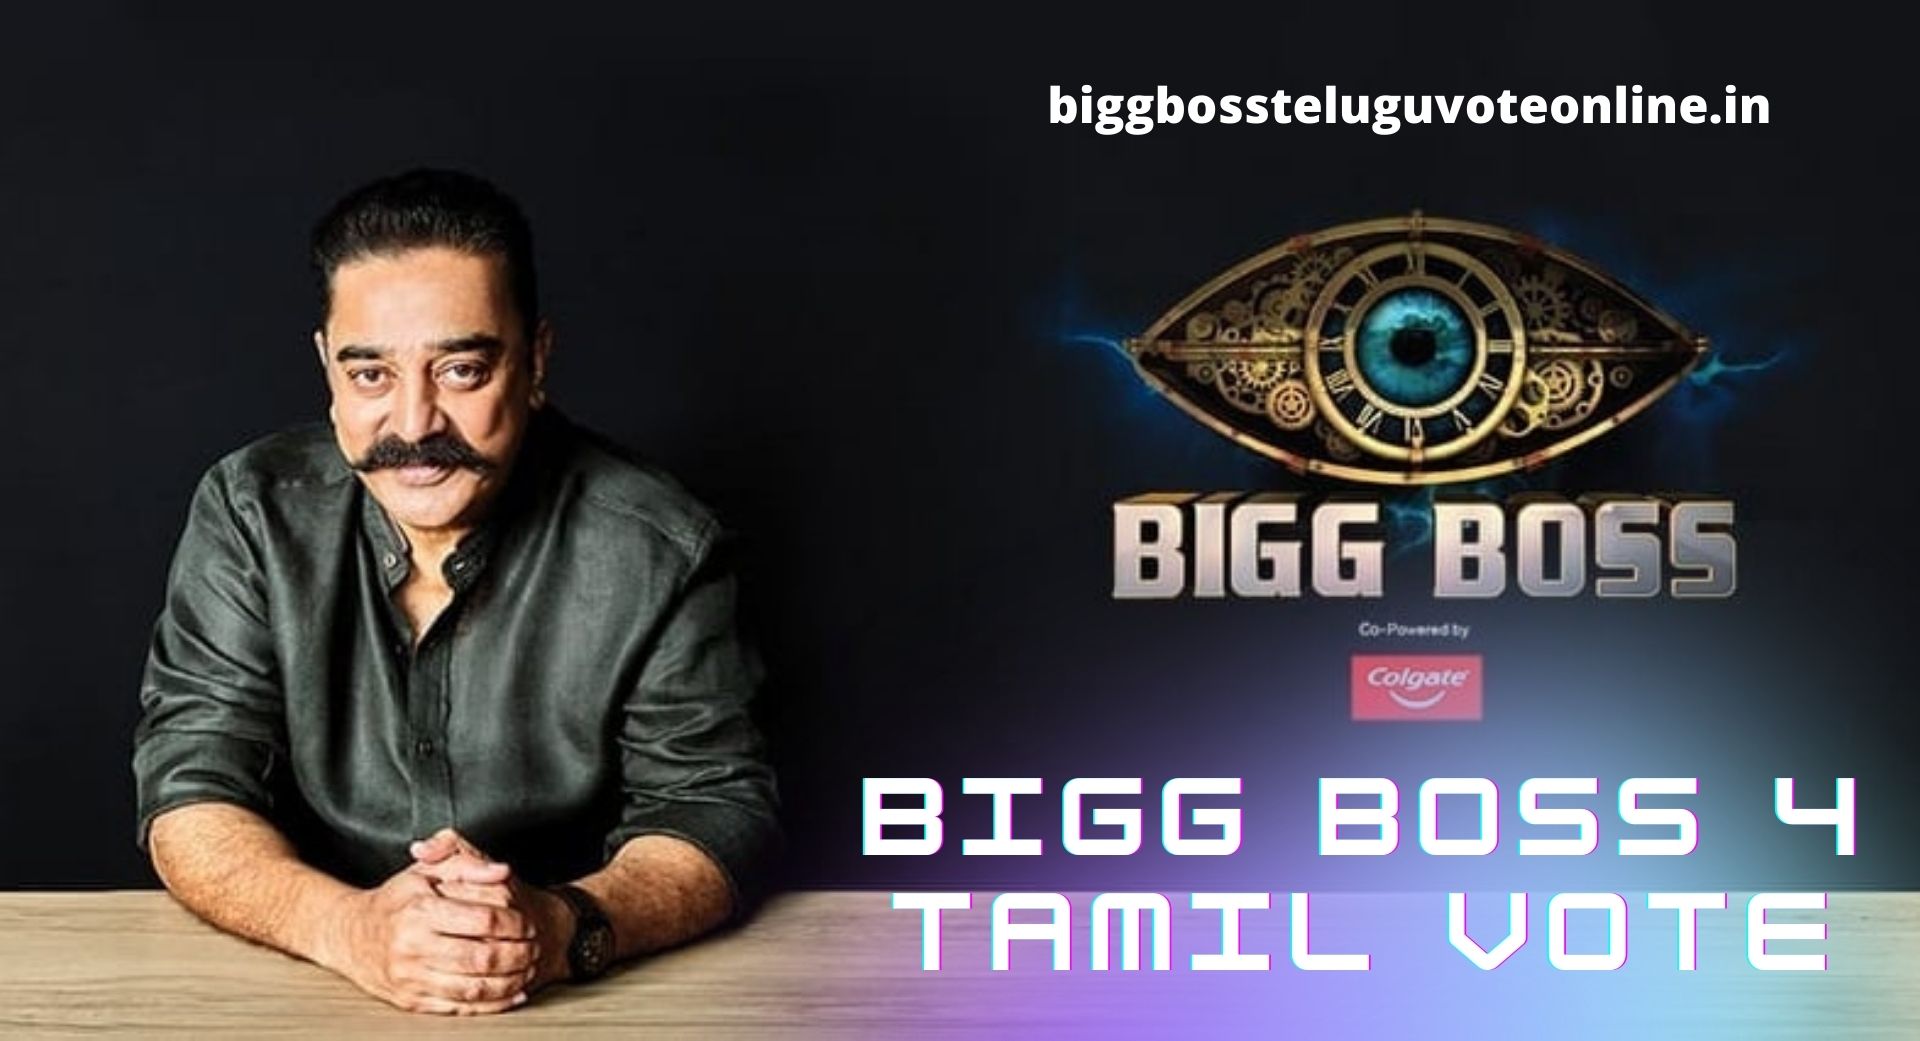 Bigg Boss 4 Tamil Vote Online Bb4 Tamil Voting Results Also, the missed call voting can be done with the missed call numbers provided for each contestant. bigg boss 4 tamil vote online bb4 tamil voting results